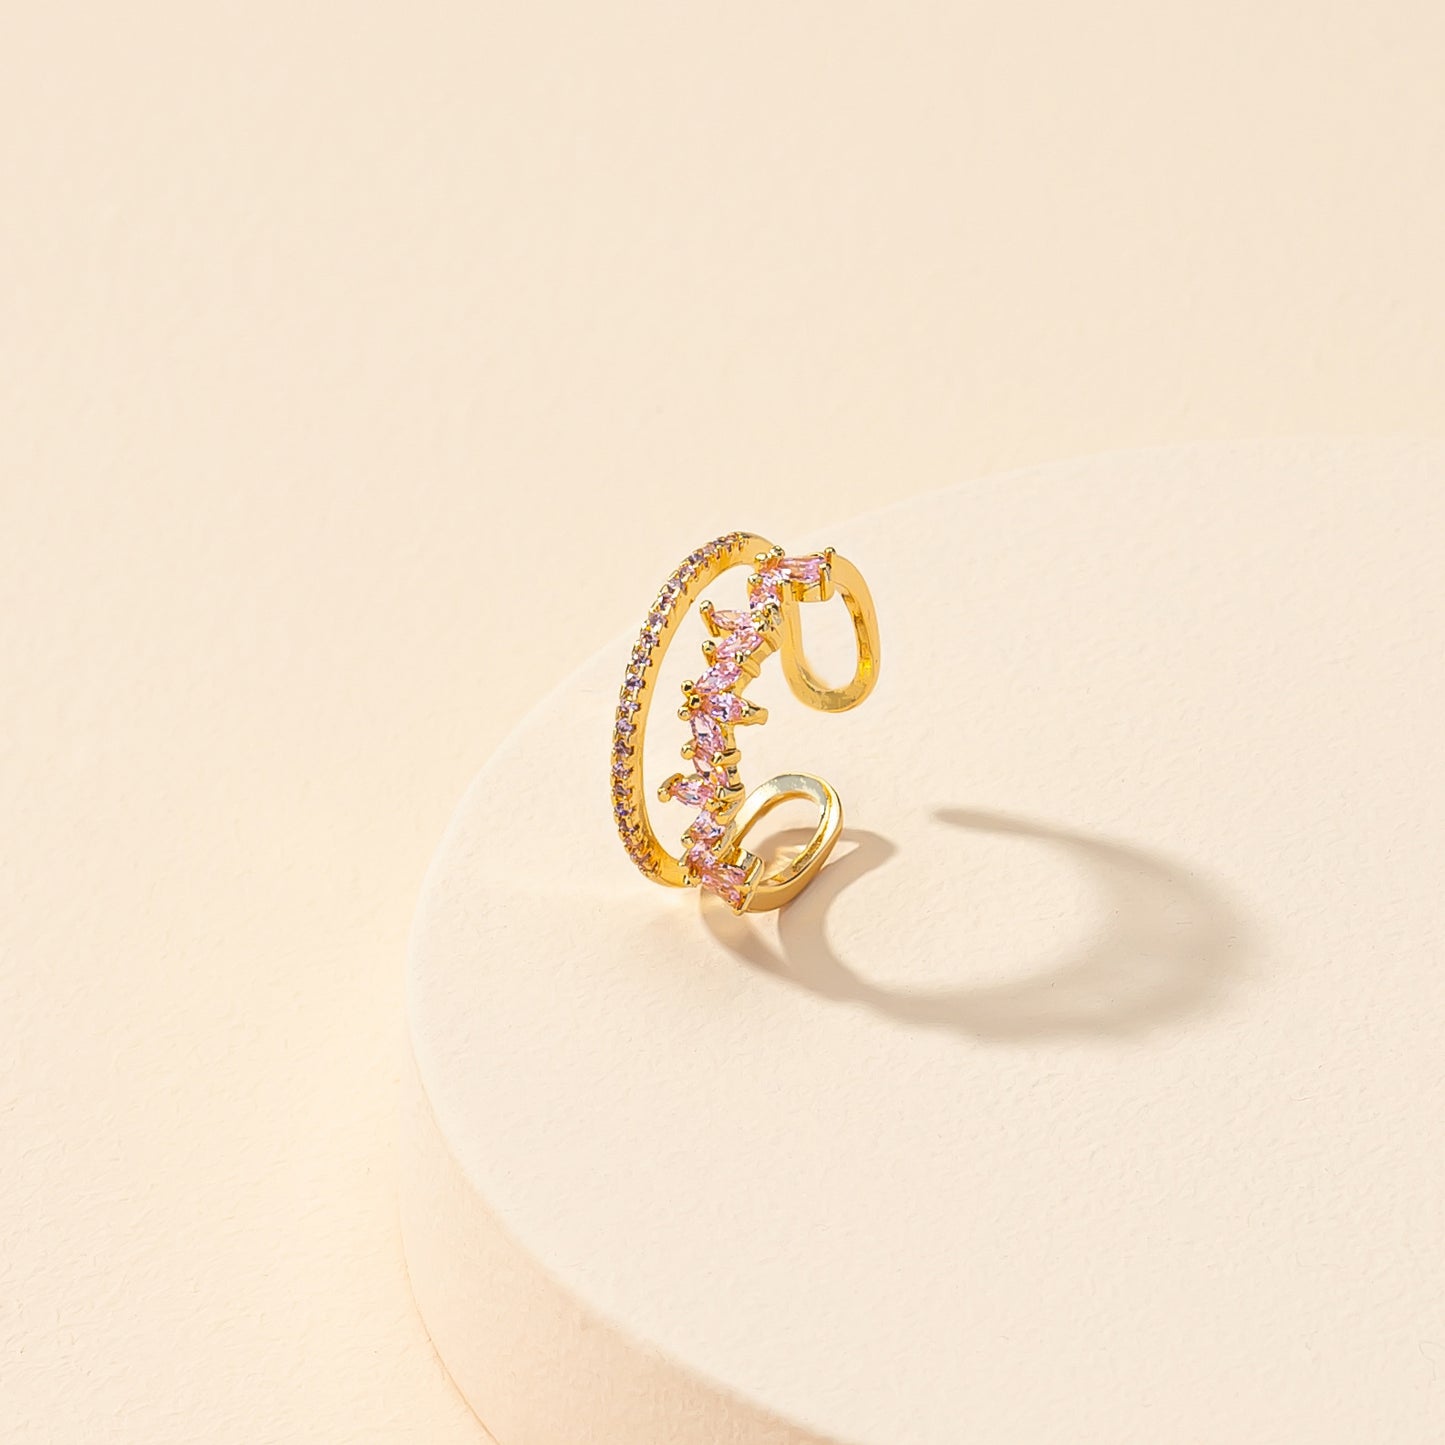 Pink Zirconia Open Ring - Elegant Handcrafted Statement Jewelry for Instagram-Worthy Style